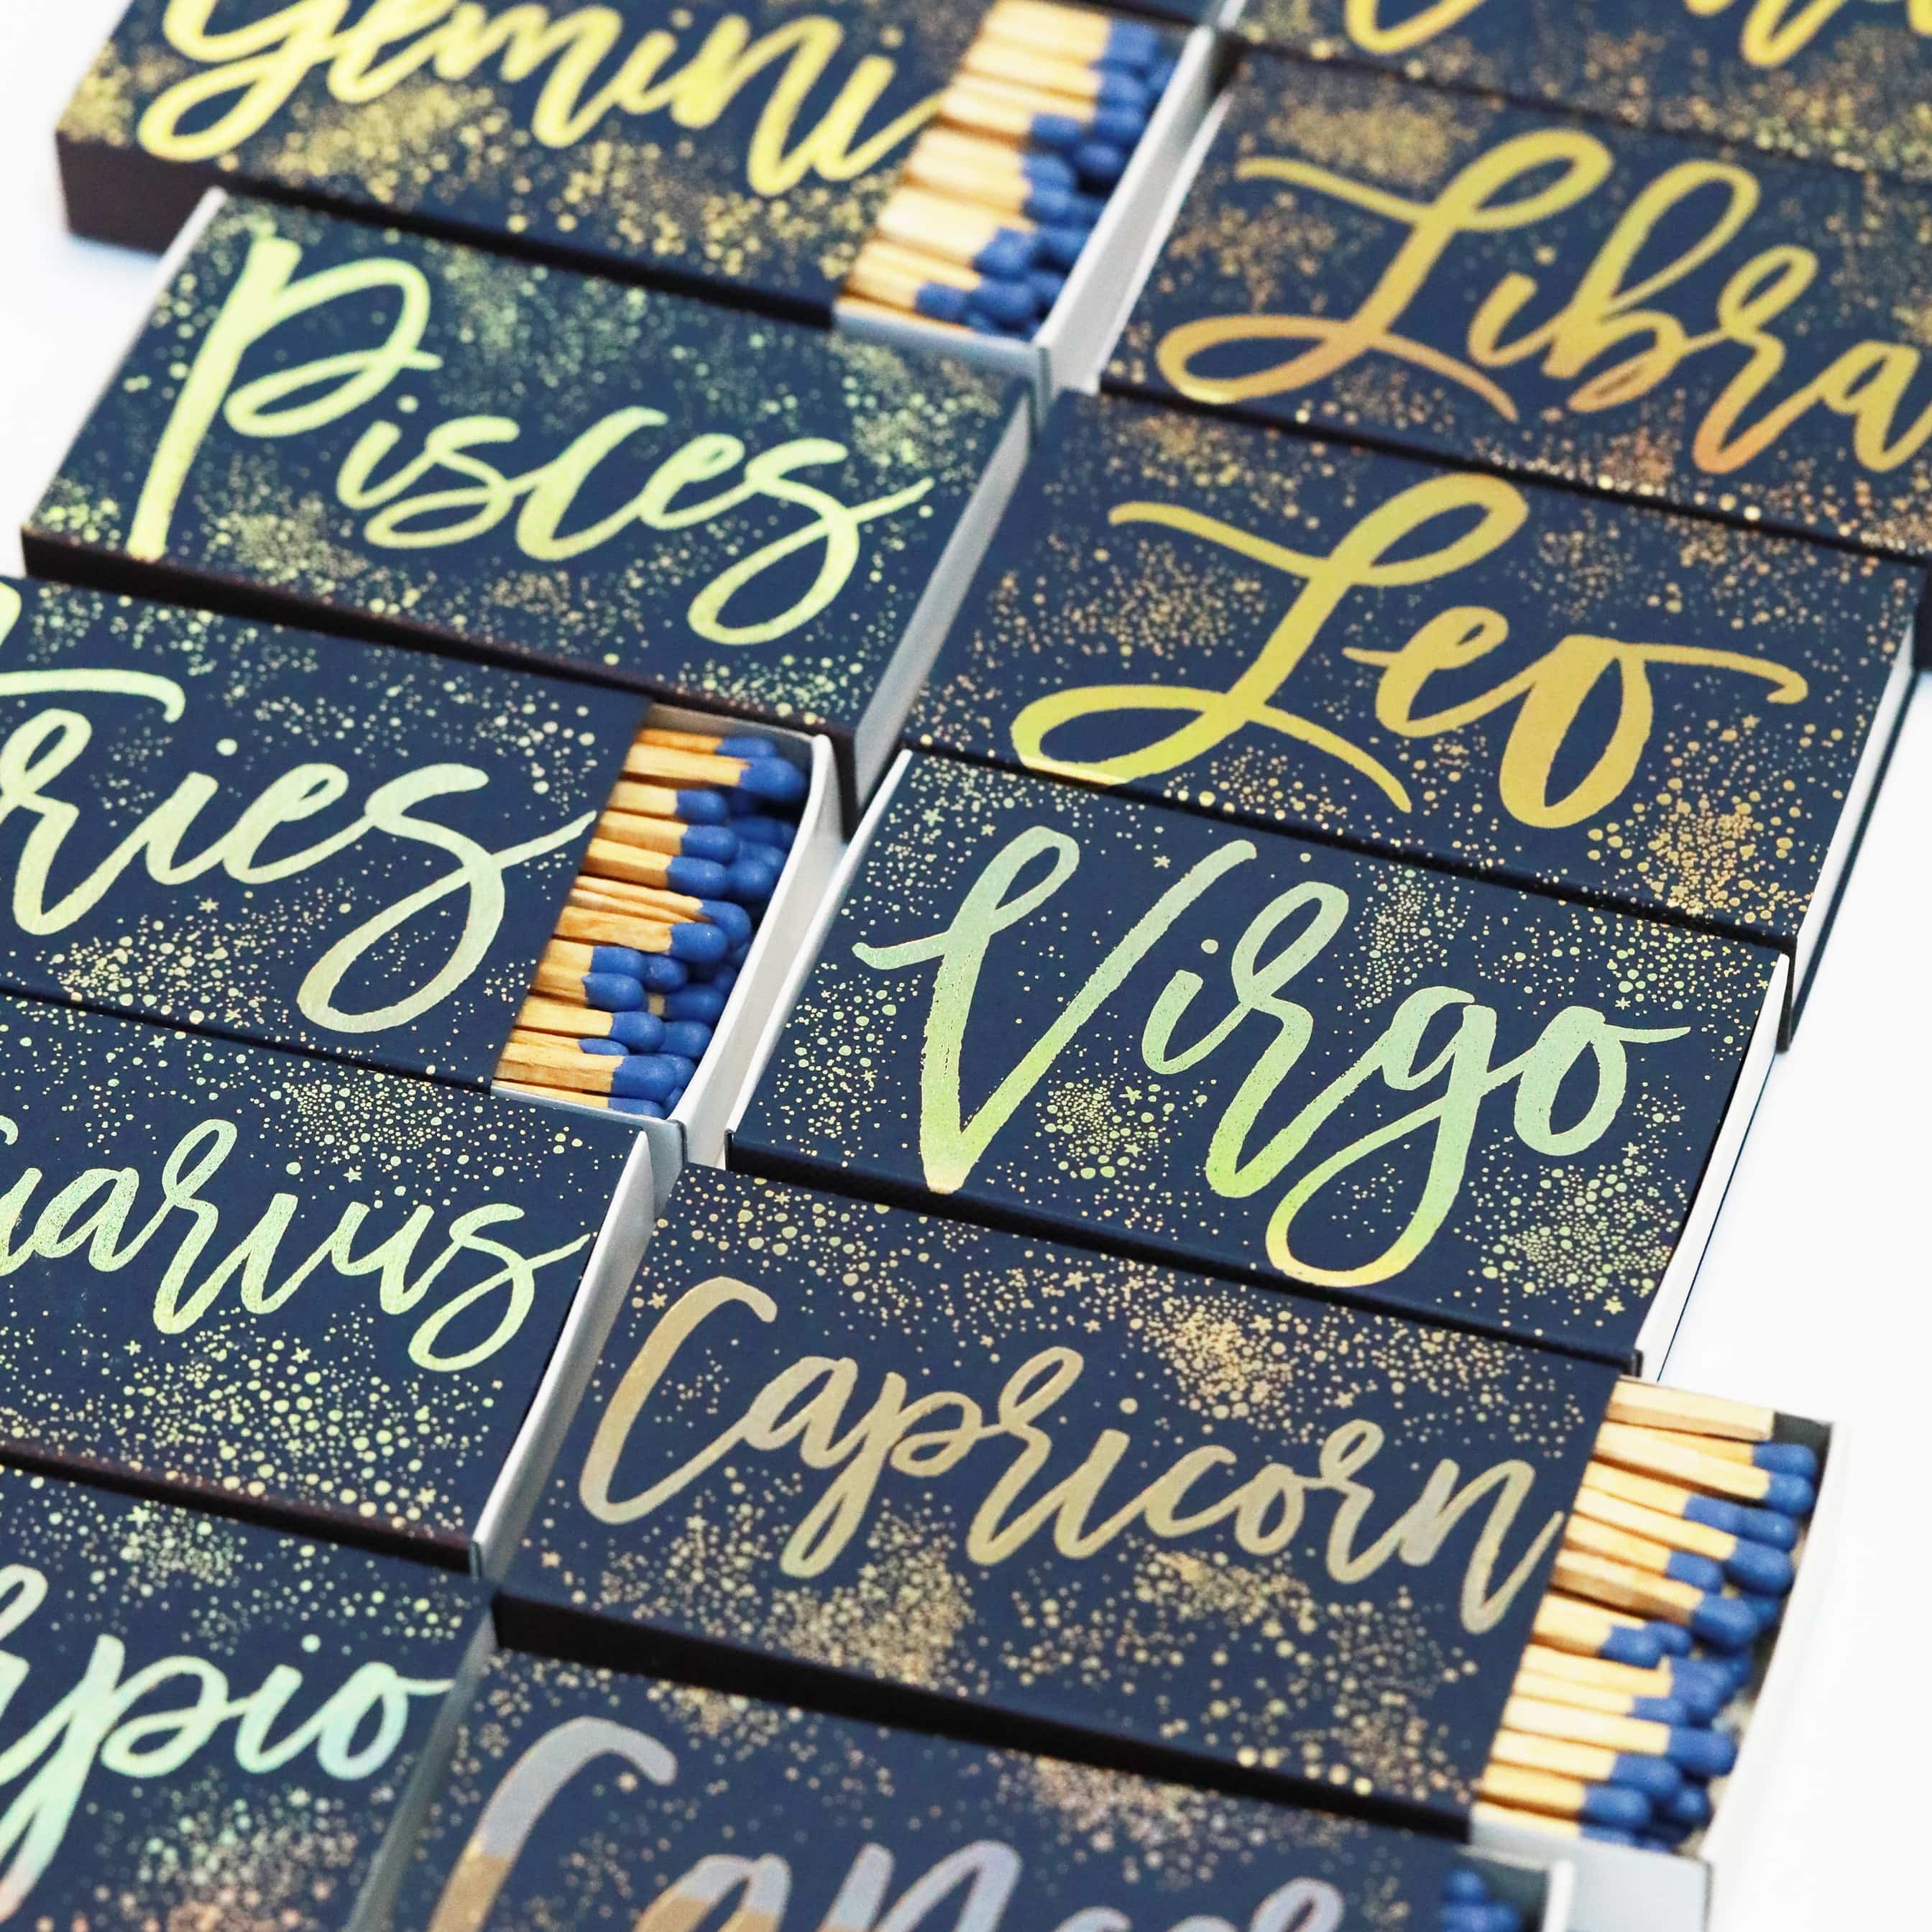 Capricorn Zodiac Matchbook - Extgra Large 4.5" Cigar Matches - The Gilded Witch